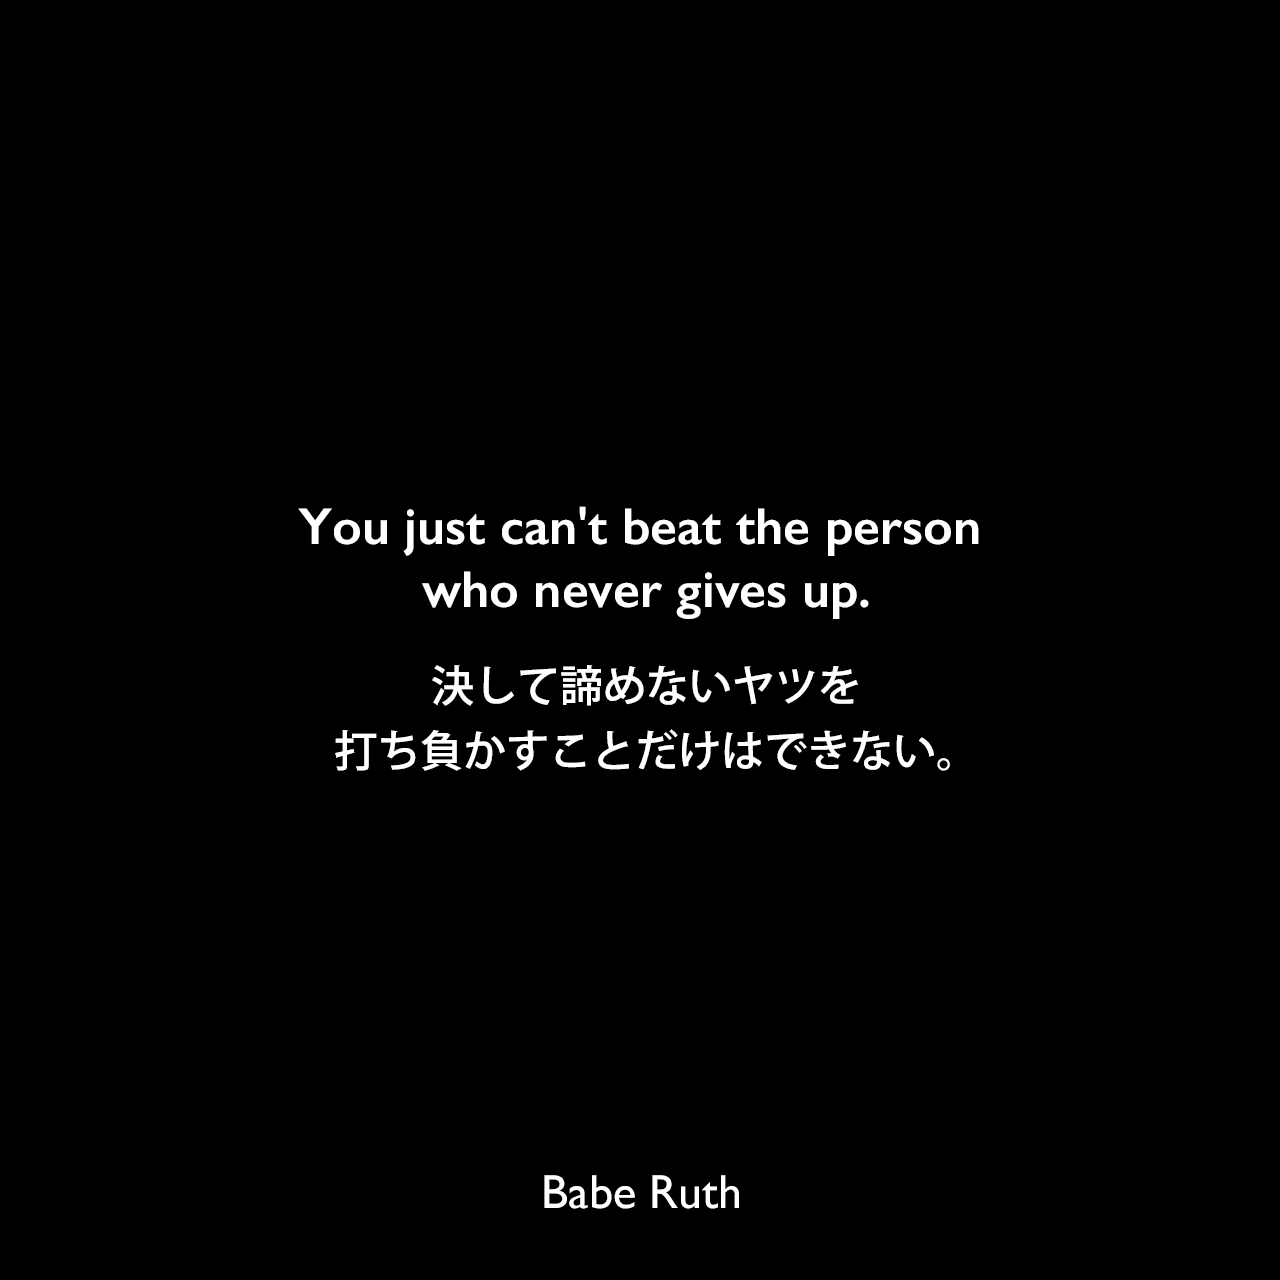 You just can't beat the person who never gives up.決して諦めないヤツを打ち負かすことだけはできない。